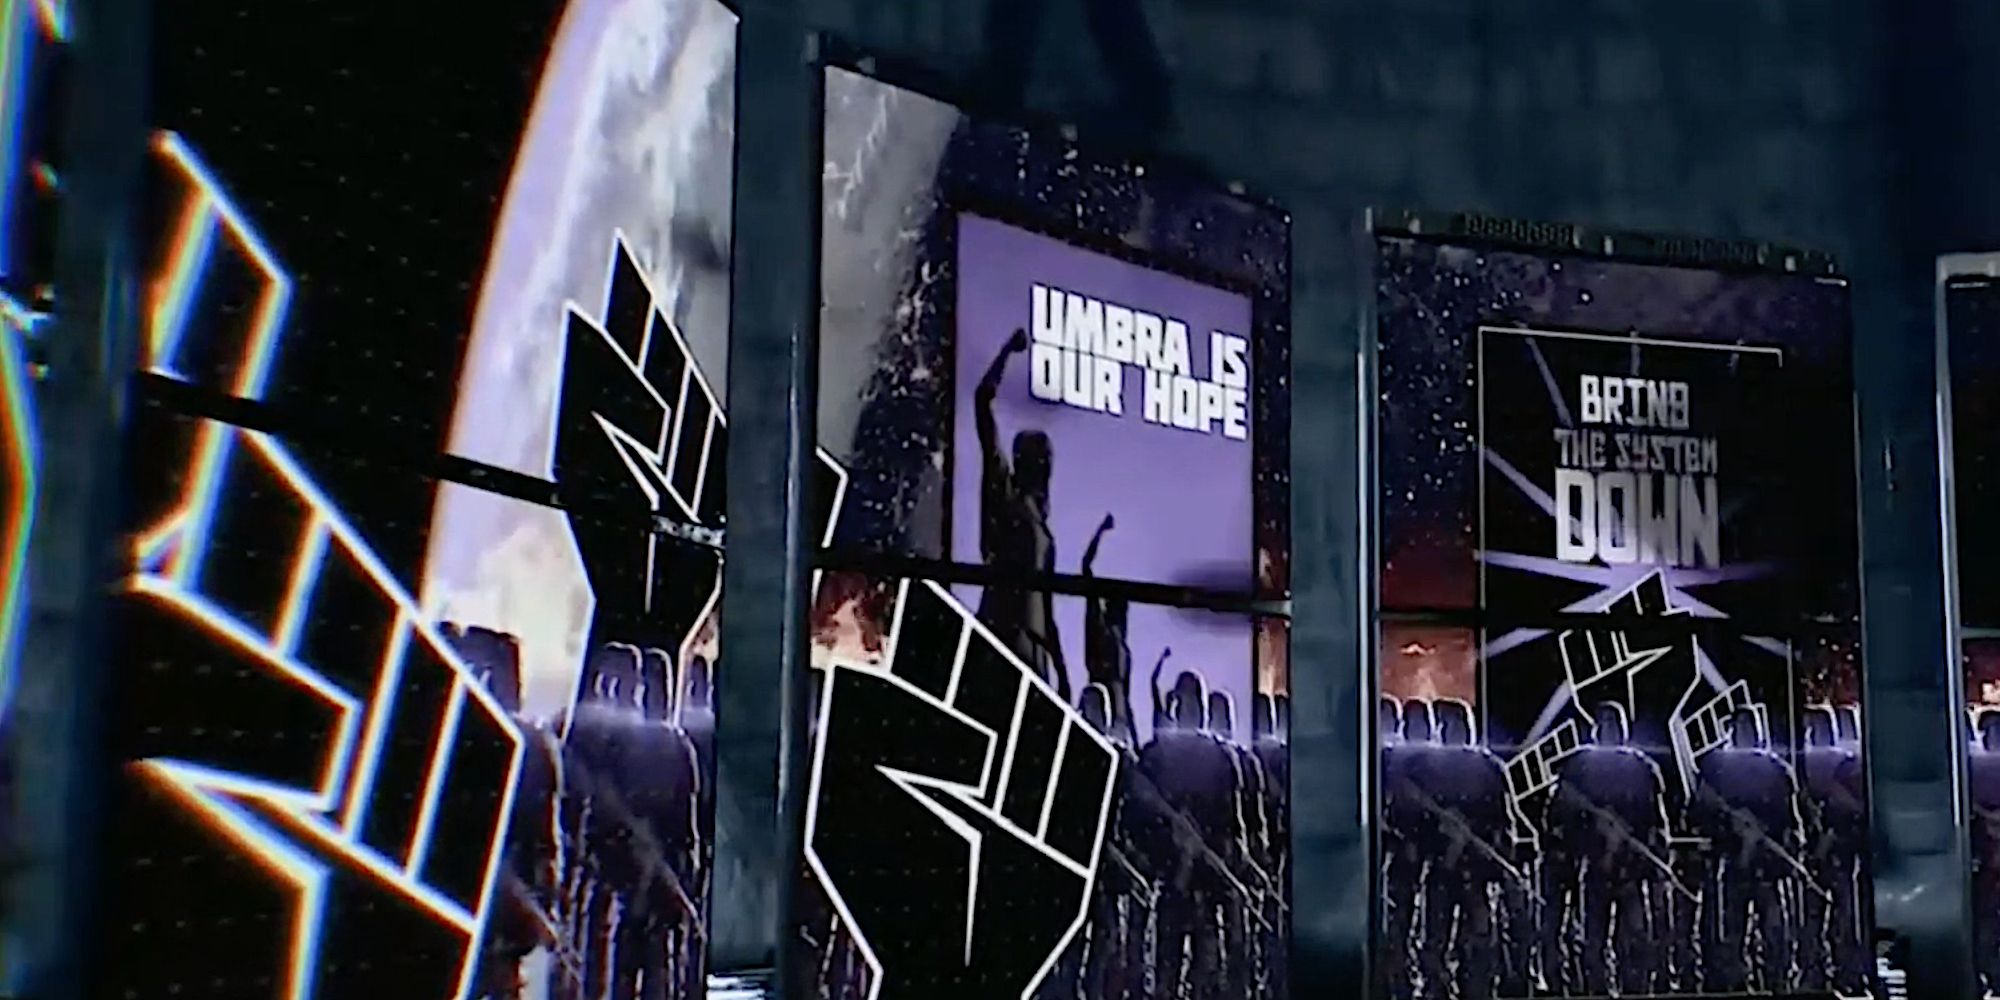 A series of displays showing icons of clenched black fists